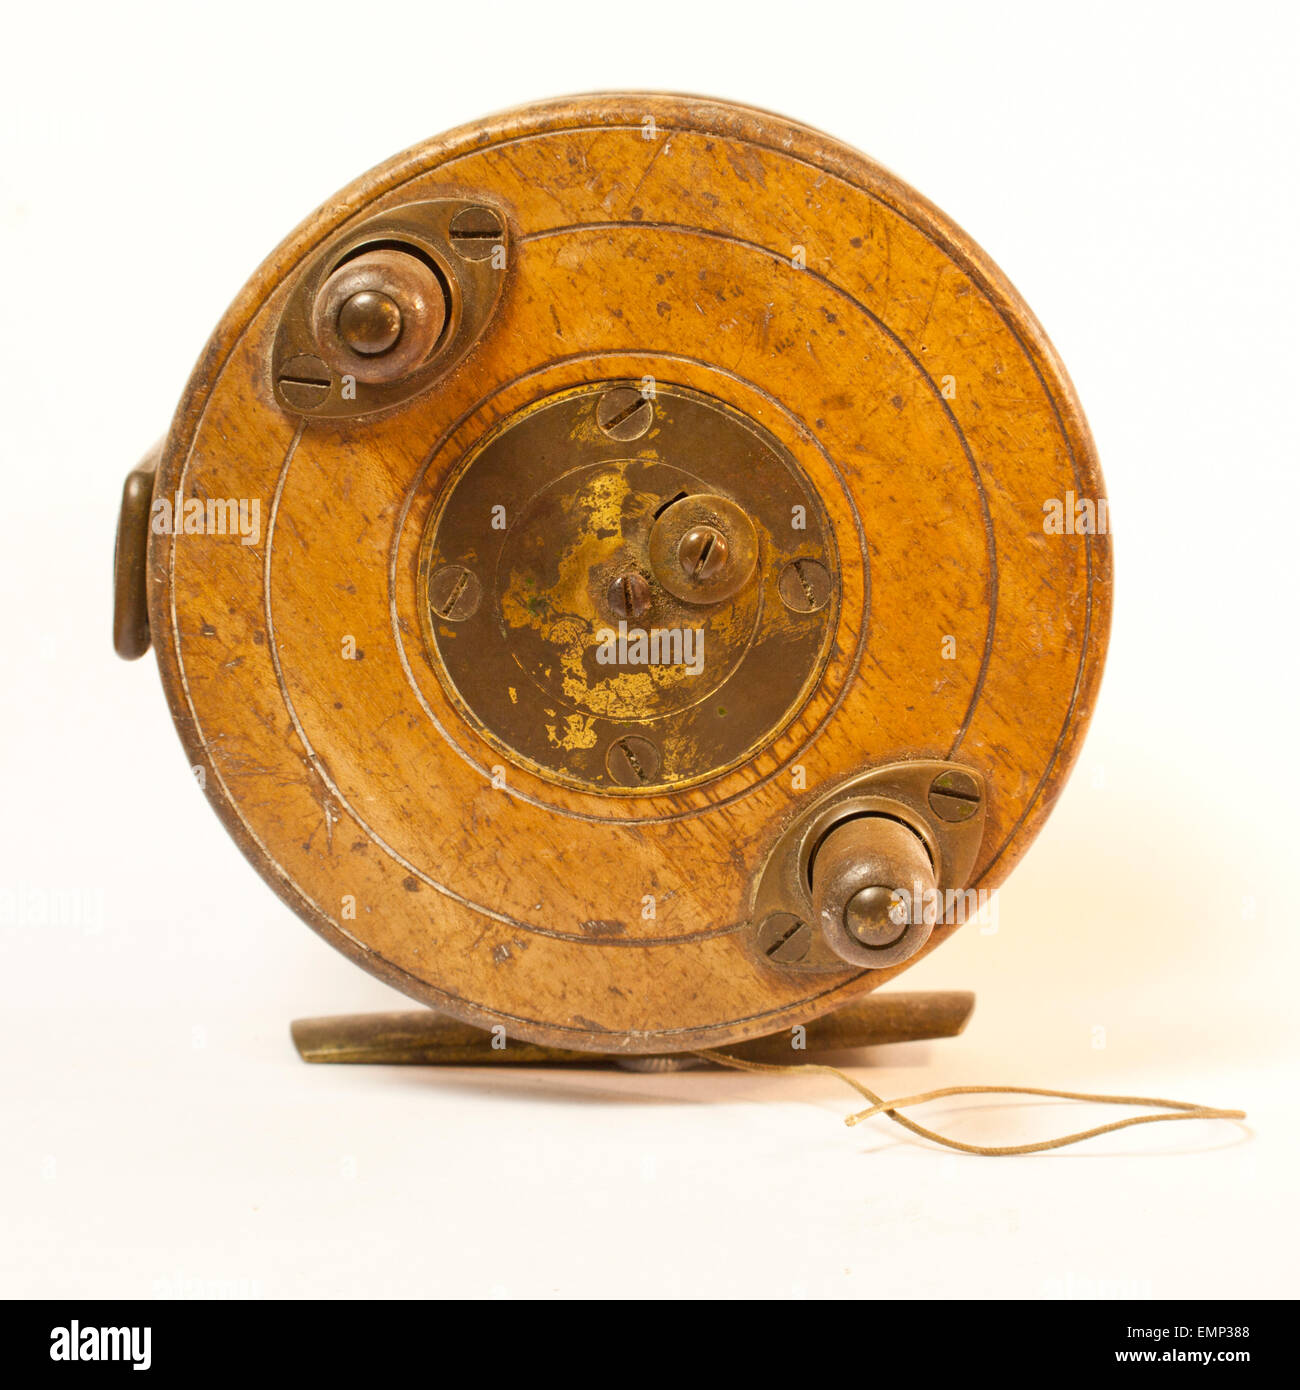 Antique wooden fly fishing reel Stock Photo